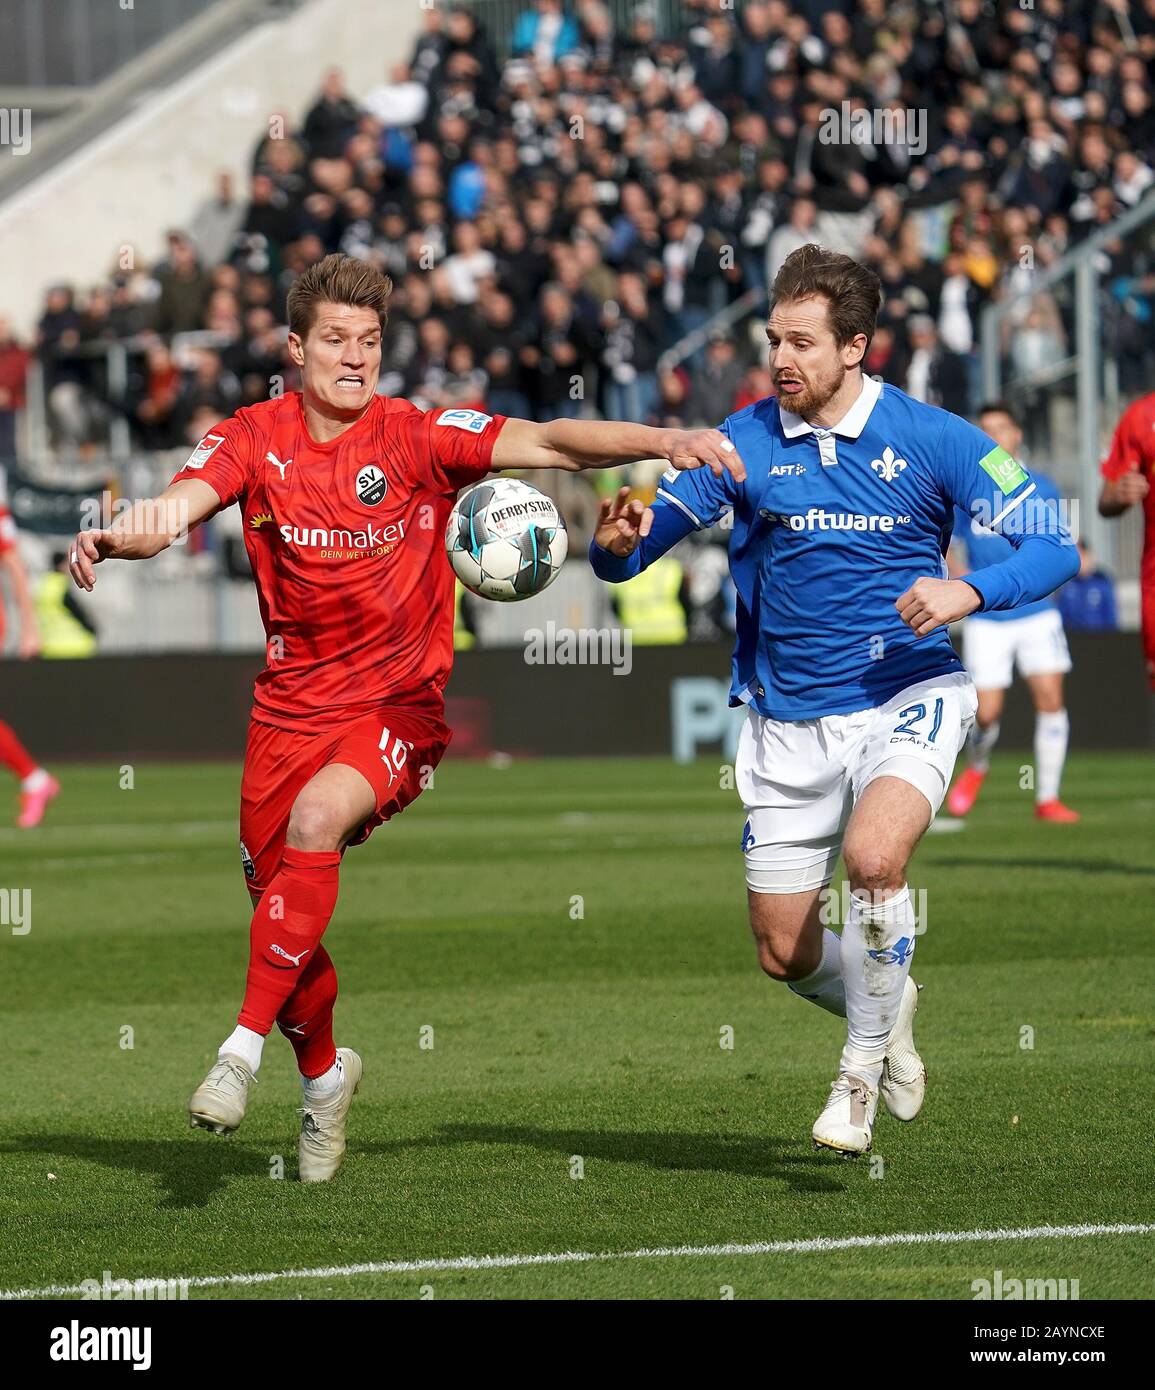 Darmstadt, Germany. 16th Feb, 2020. Football: 2nd Bundesliga, Darmstadt 98 - SV Sandhausen, 22nd matchday. Immanuel Höhn (r) of Darmstadt 98 is in the duel with Kevin Behrens of SV Sandhausen. Credit: Hasan Bratic/dpa - IMPORTANT NOTE: In accordance with the regulations of the DFL Deutsche Fußball Liga and the DFB Deutscher Fußball-Bund, it is prohibited to exploit or have exploited in the stadium and/or from the game taken photographs in the form of sequence images and/or video-like photo series./dpa/Alamy Live News Stock Photo